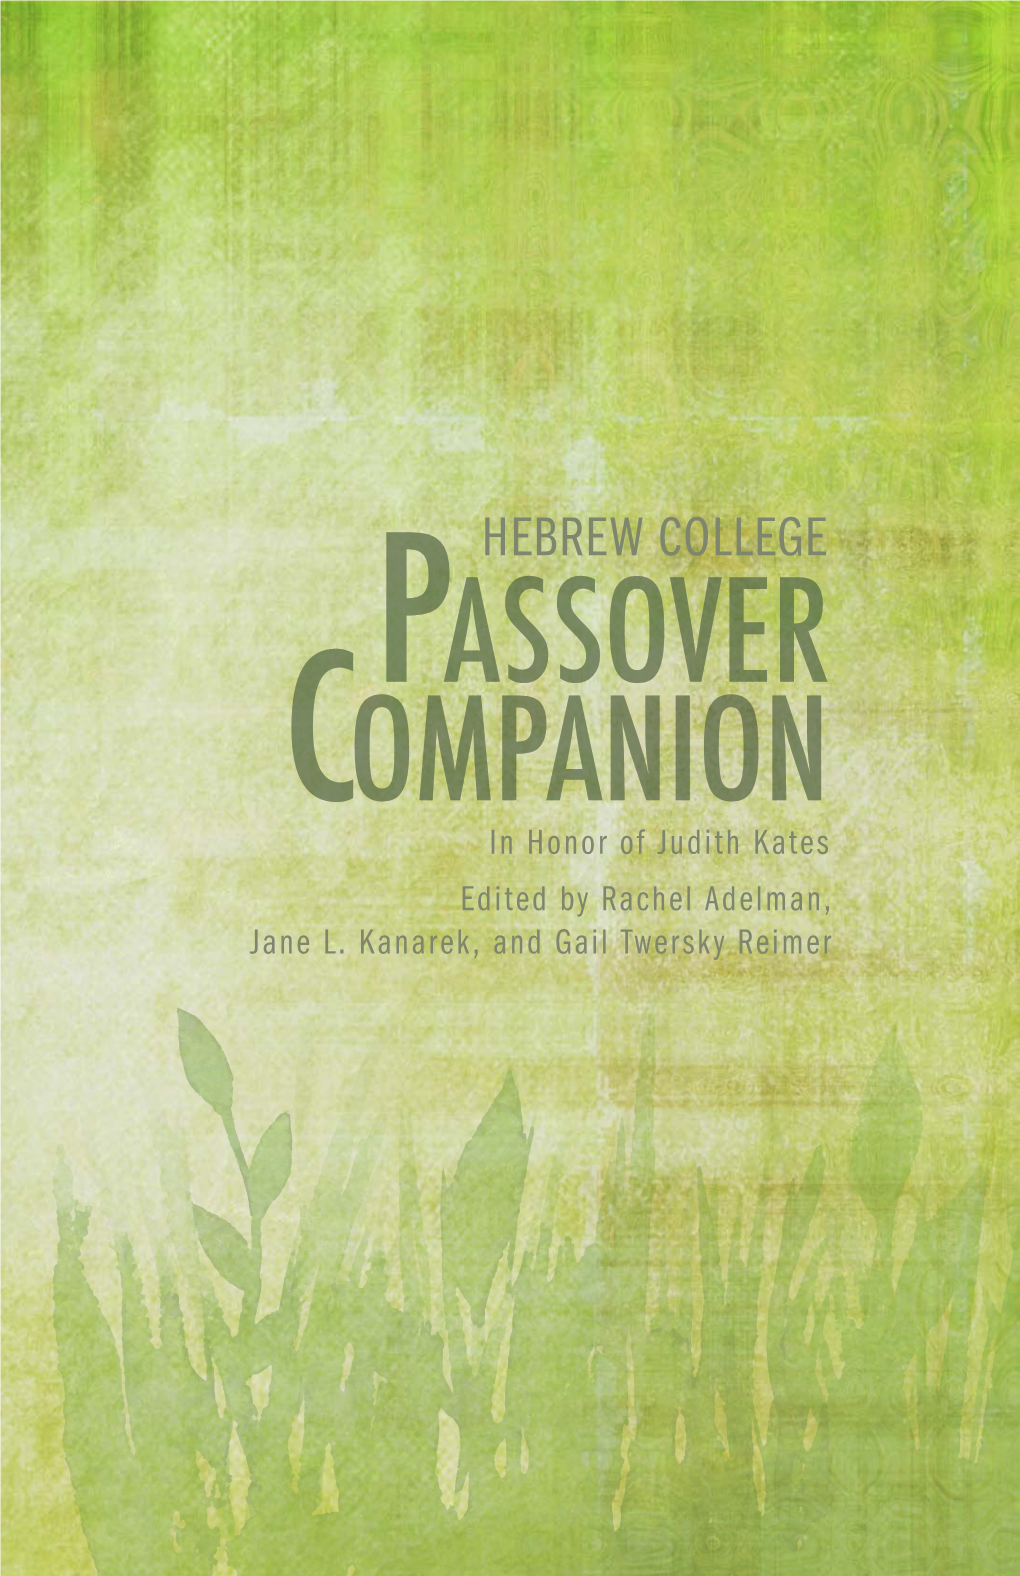 HEBREW COLLEGE Passover Companion in Honor of Judith Kates Edited by Rachel Adelman, Jane L